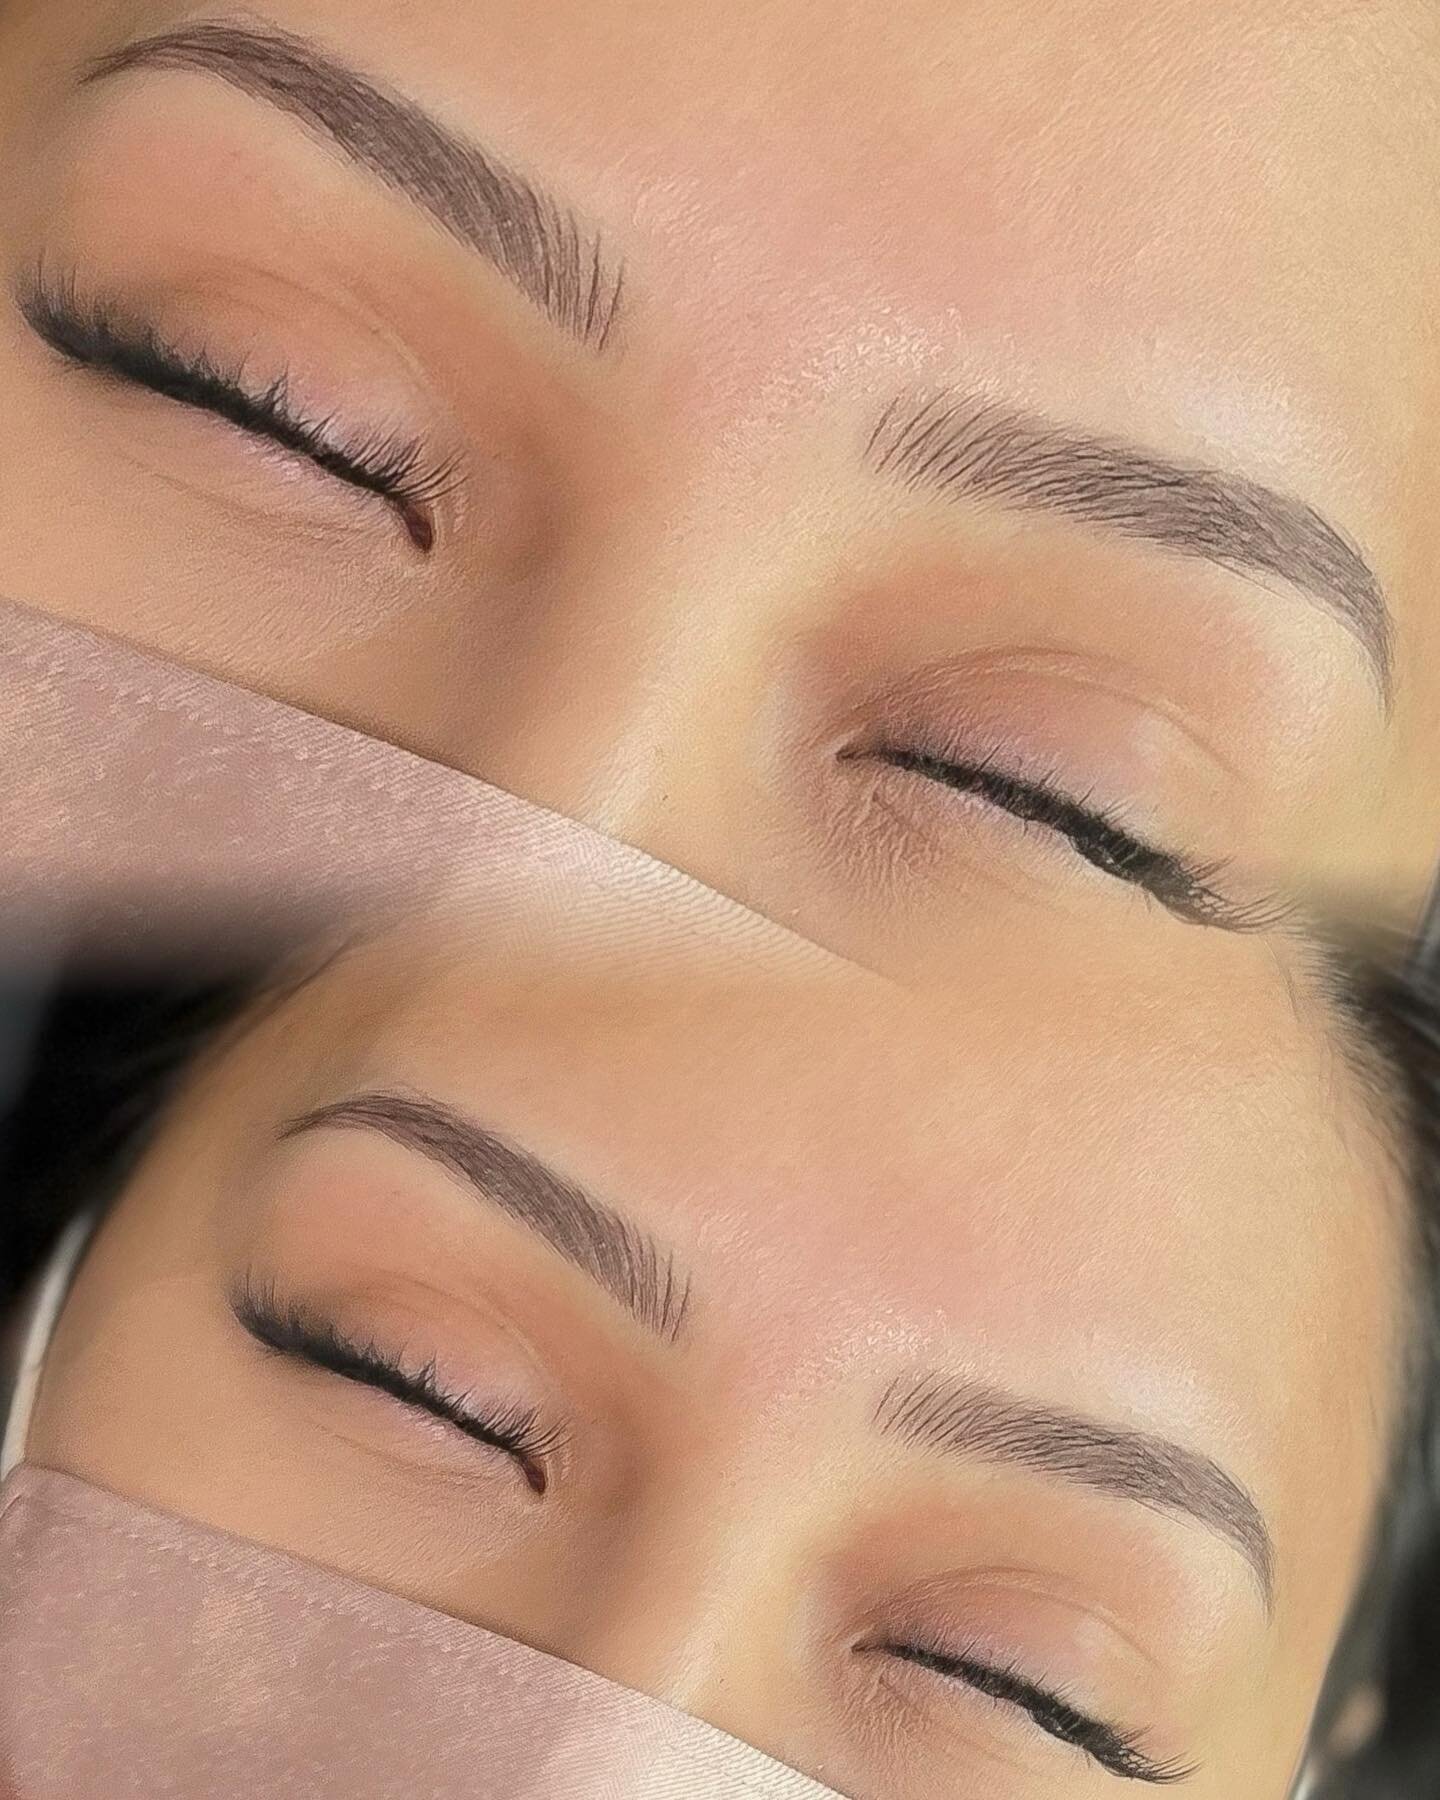 Defined but natural looking brows☑️

So mad I didn&rsquo;t get a proper before picture of these brows, this transformation was a major one! I can&rsquo;t wait to see them healed 🤍

.
.
.
.
.
.
.
.

#1111cosmetictattoo #seattle #seattlesalon #microbl